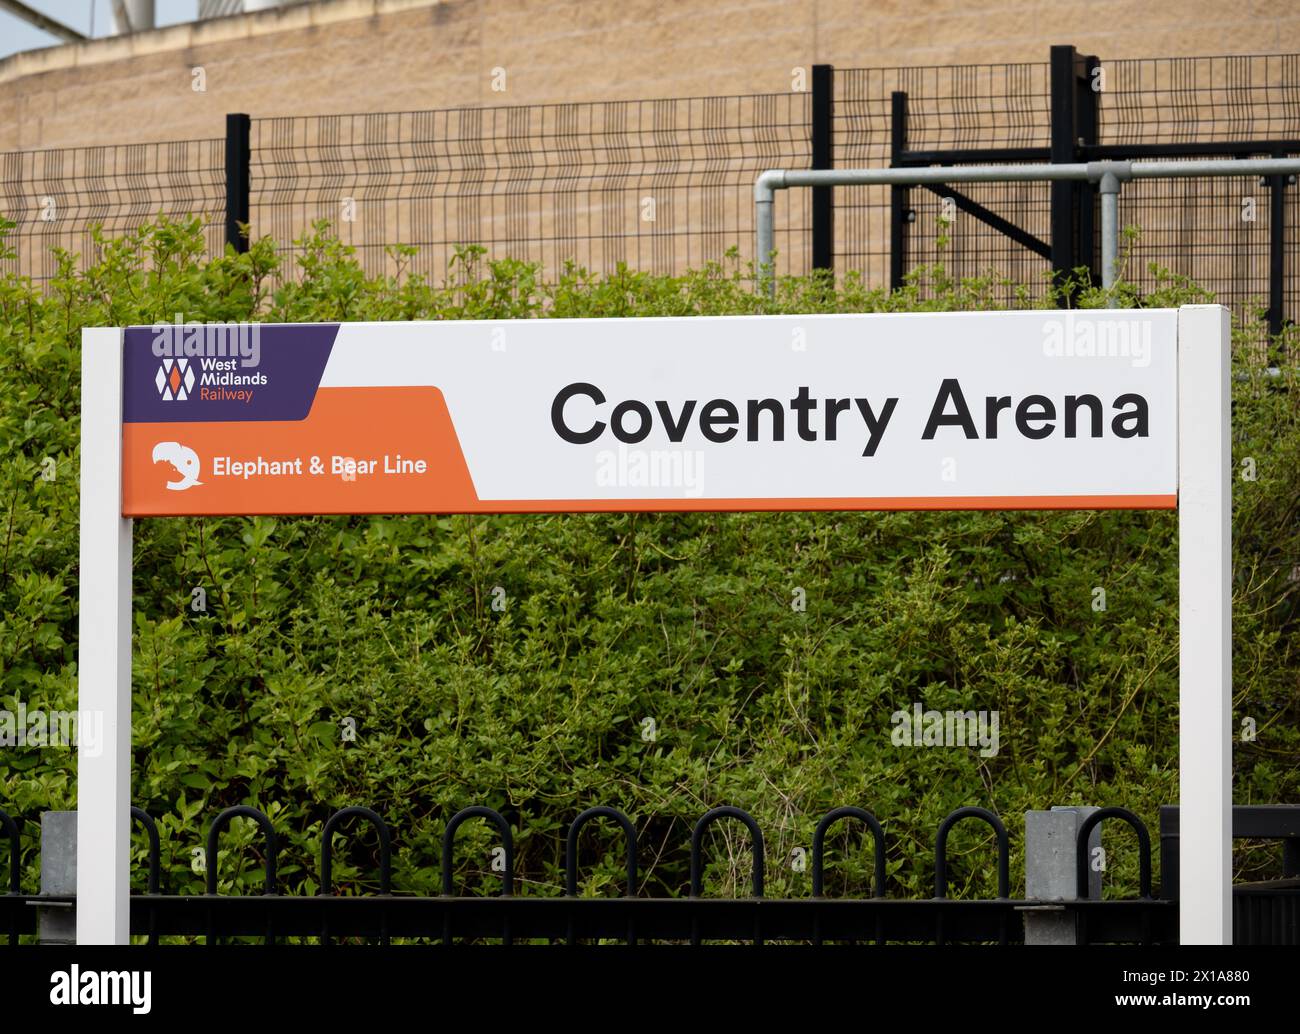 Coventry Arena railway station sign, Coventry, West Midlands, England, UK Stock Photo